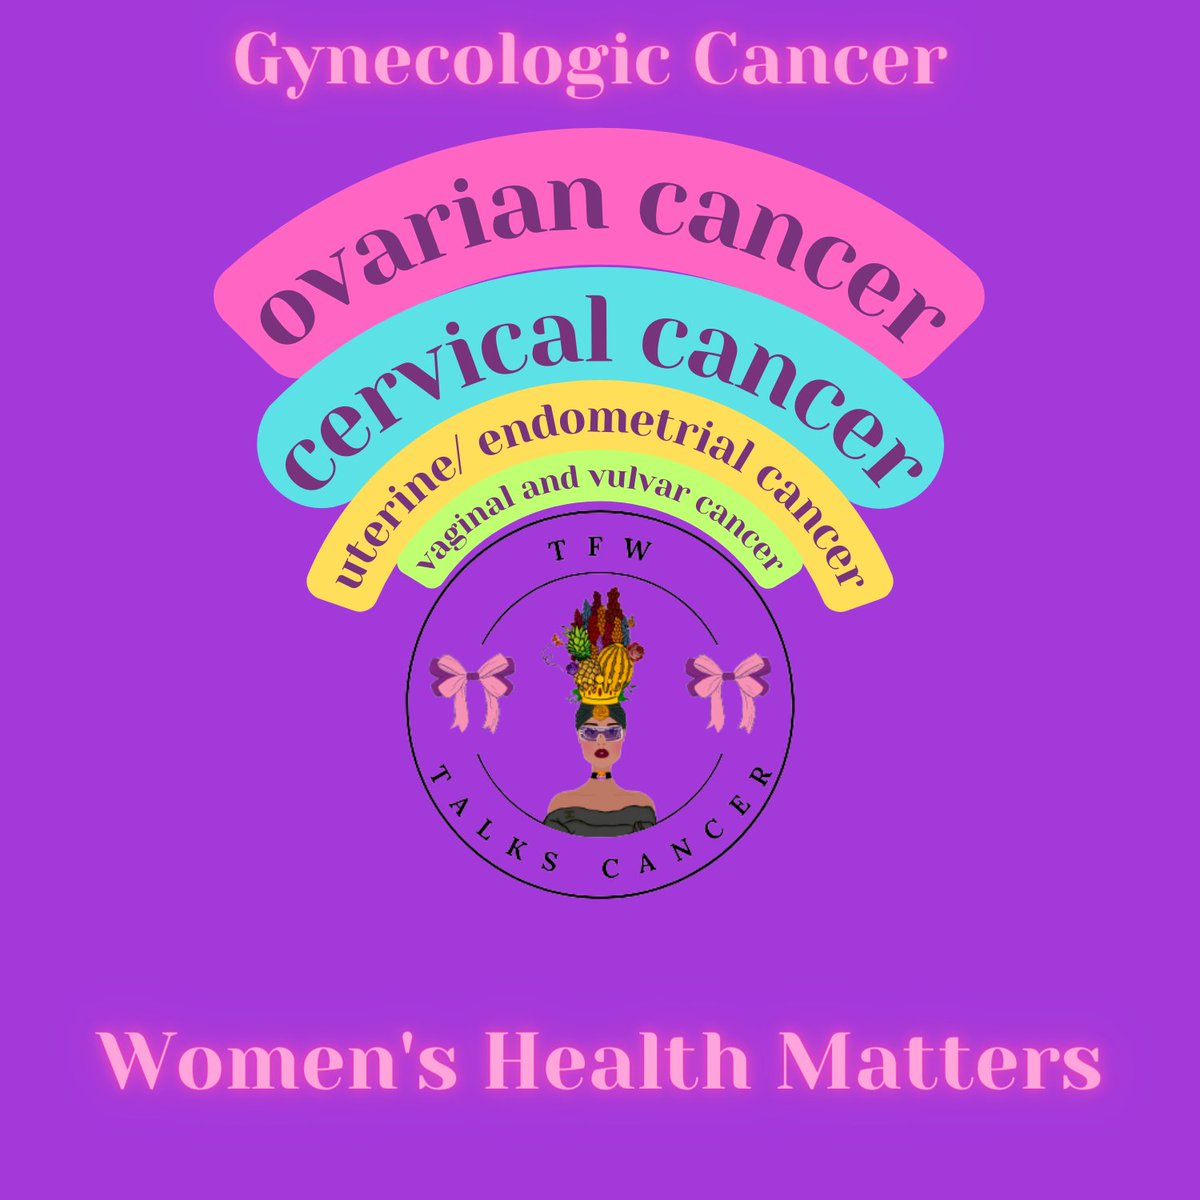 Our latest newsletter on gynecologic cancer is out.

Learn about symptoms, risk factors, and how to reduce your risk. 

Subscribe for FREE and collect it for just 5 $MATIC to support our mission. 

paragraph.xyz/@tfwtalkscance…

Stay informed, stay empowered. 💪💙 

#GynecologicCancer